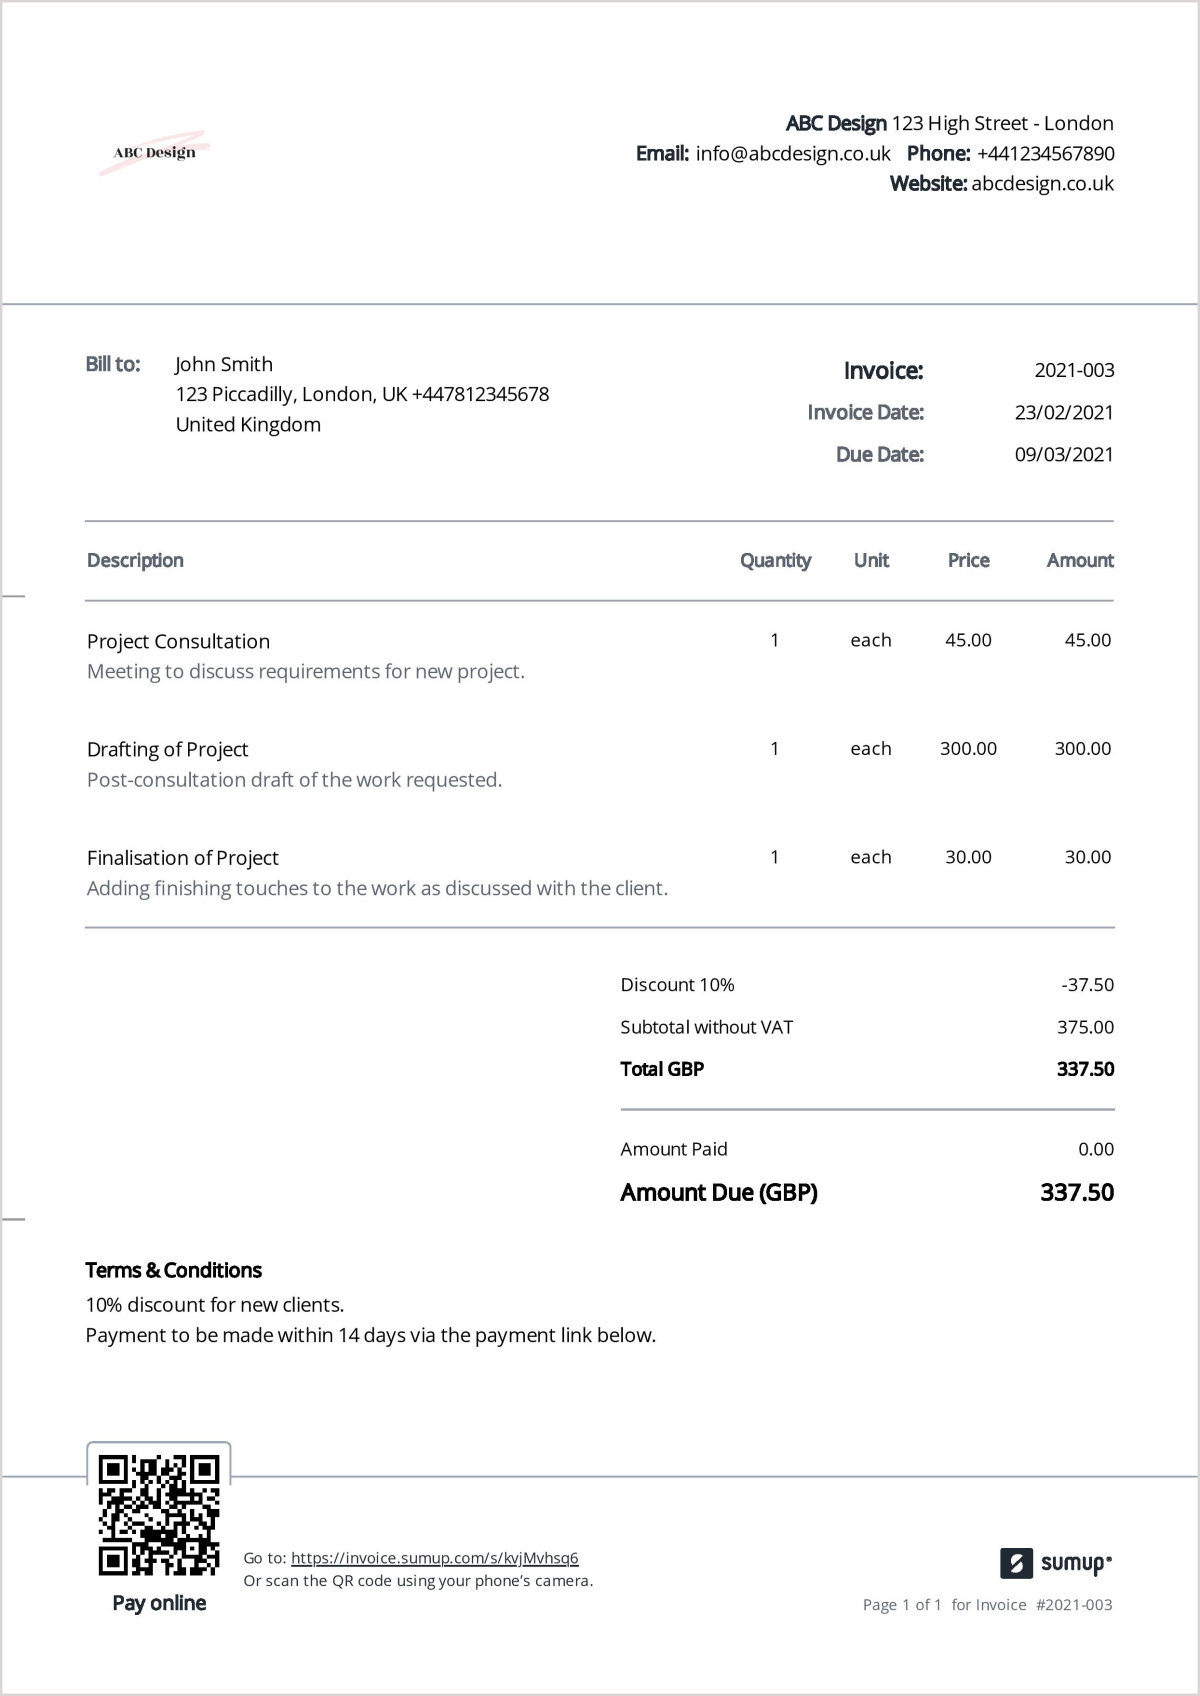 Example of a non-VAT invoice created with SumUp Invoices